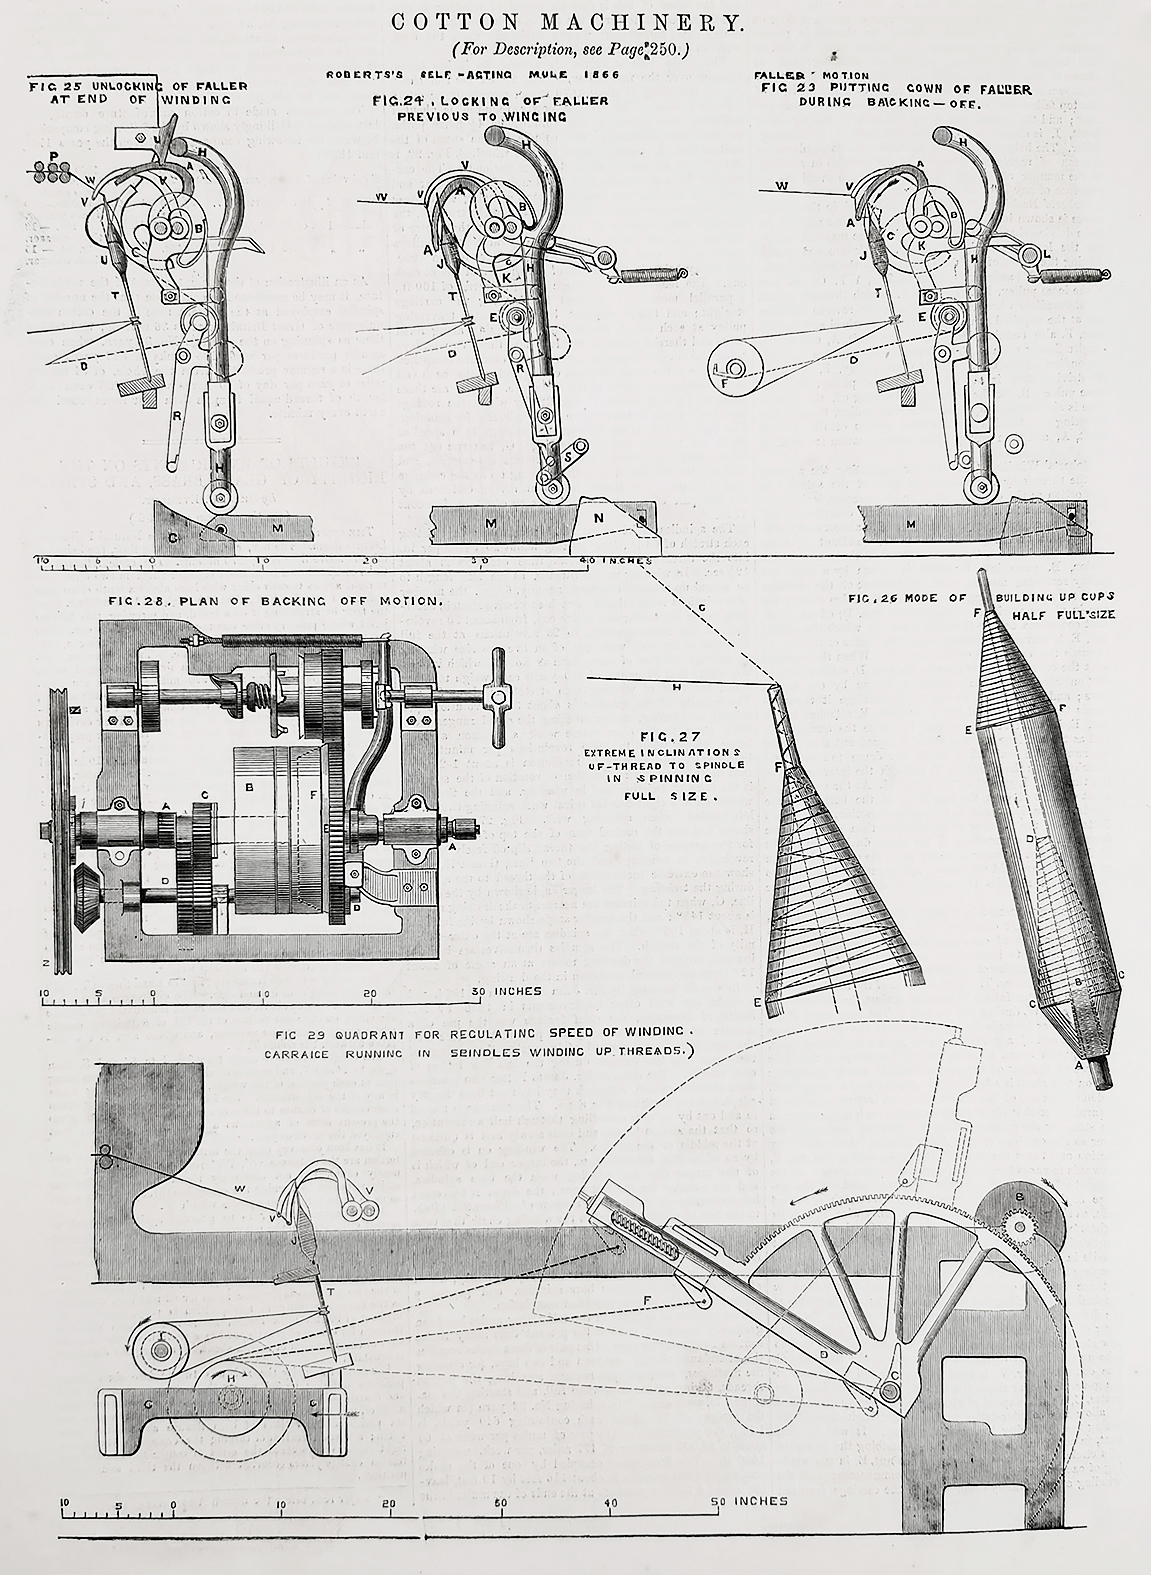 Cotton Machinery - Antique Print from 1867